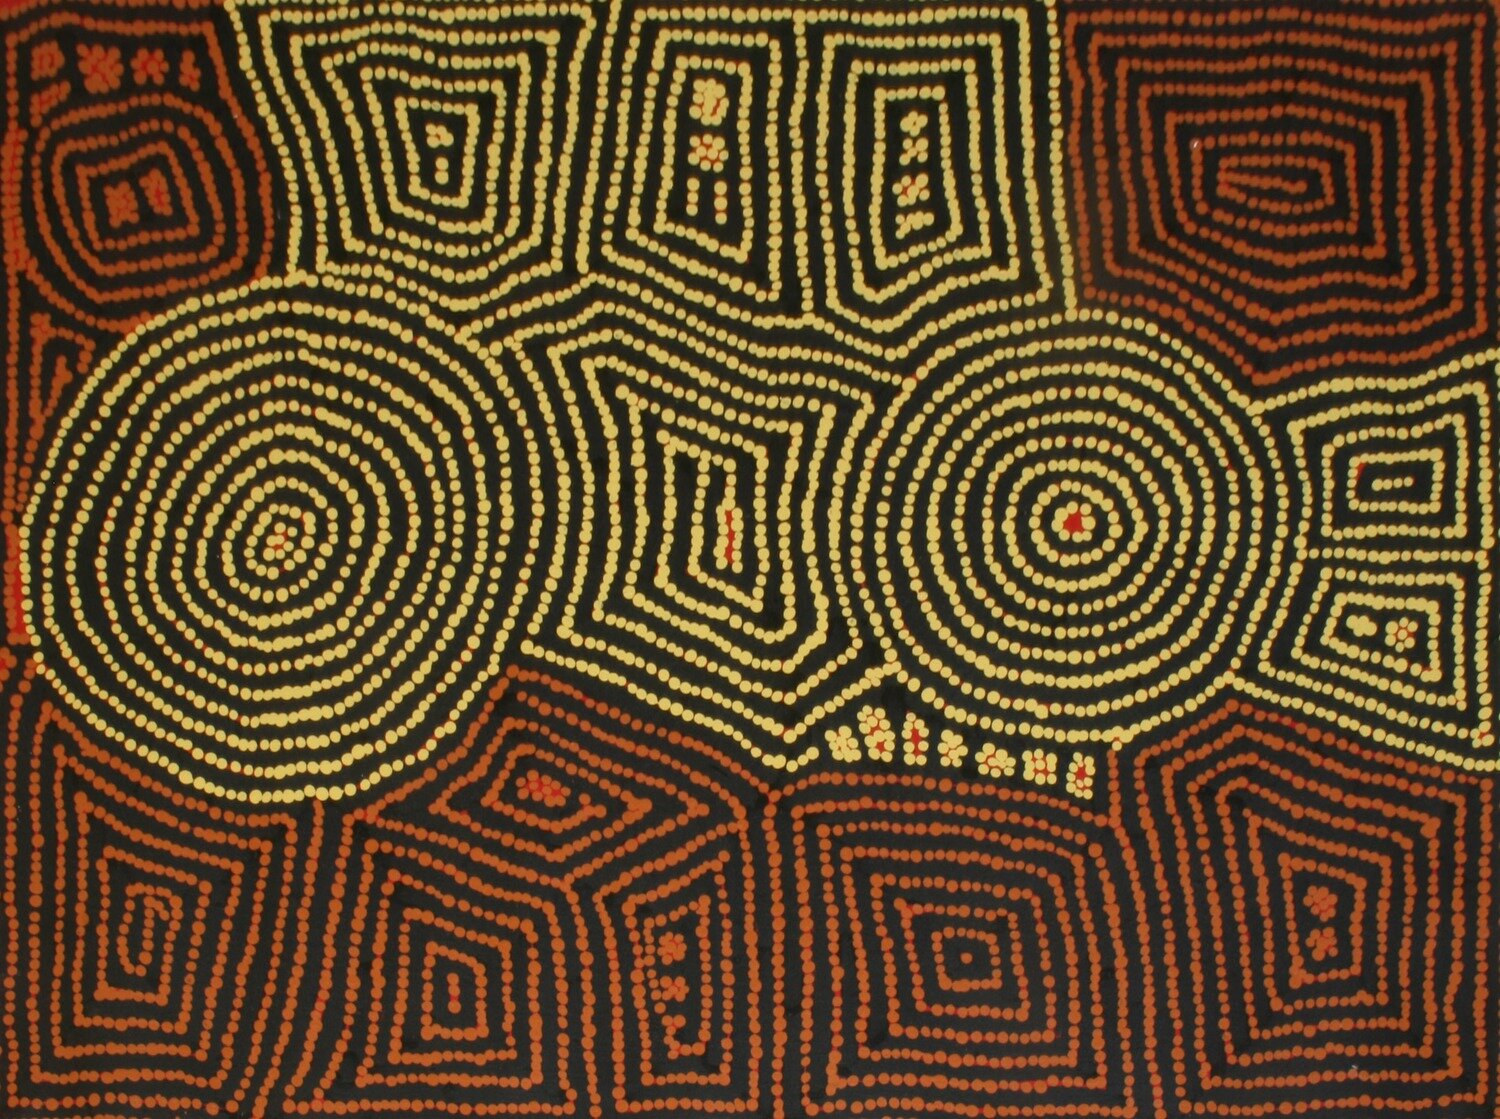 Tingari Cycle (2005) by Barney Campbell Tjakamarra 122x91cm Cat 9360BC